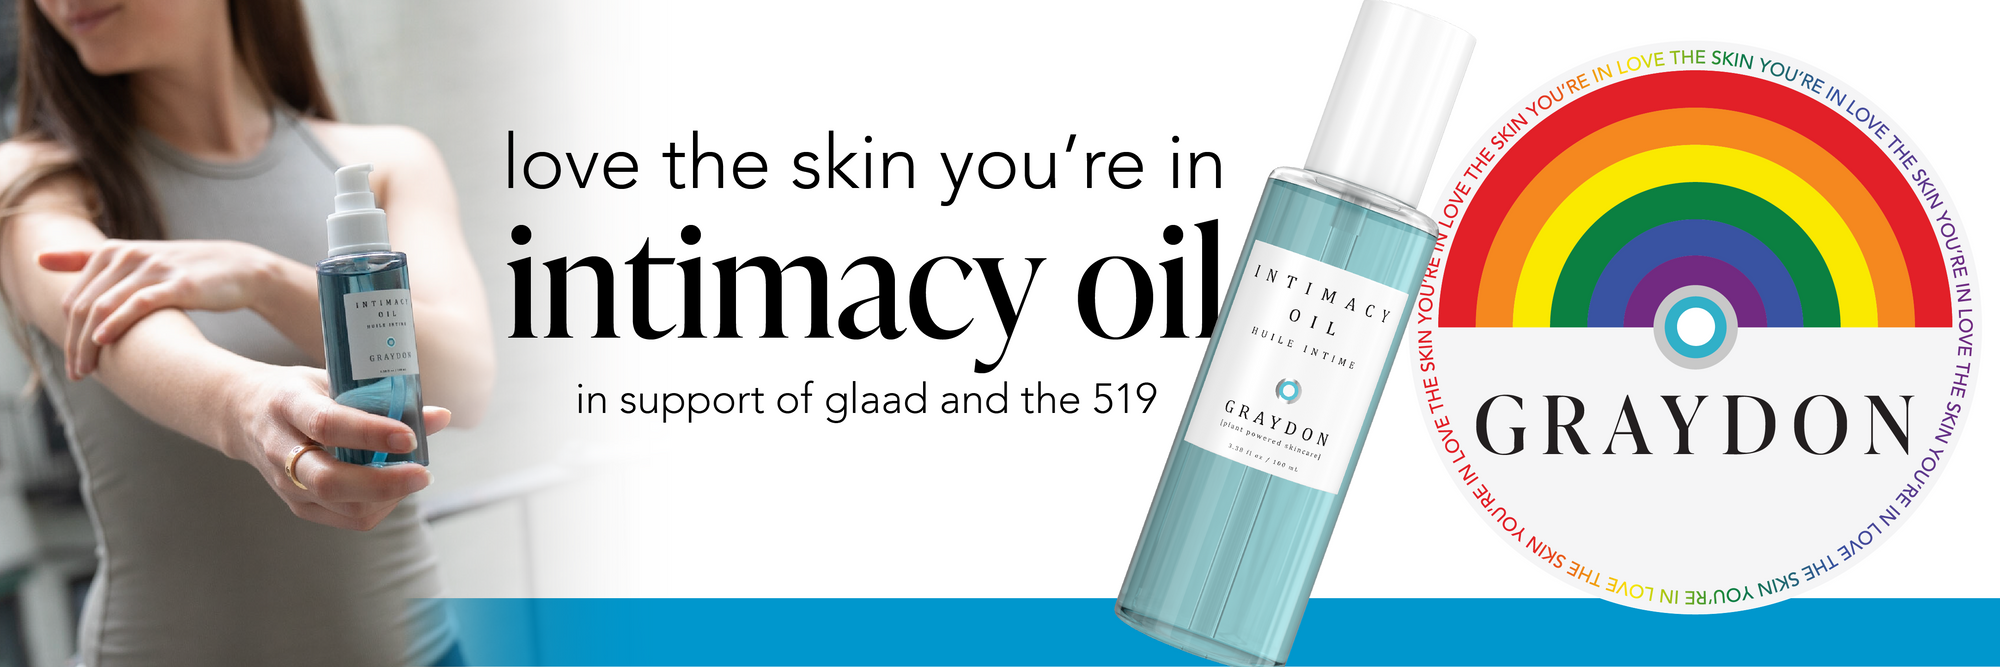 love the skin you're in intimacy oil in support of glaad and the 519